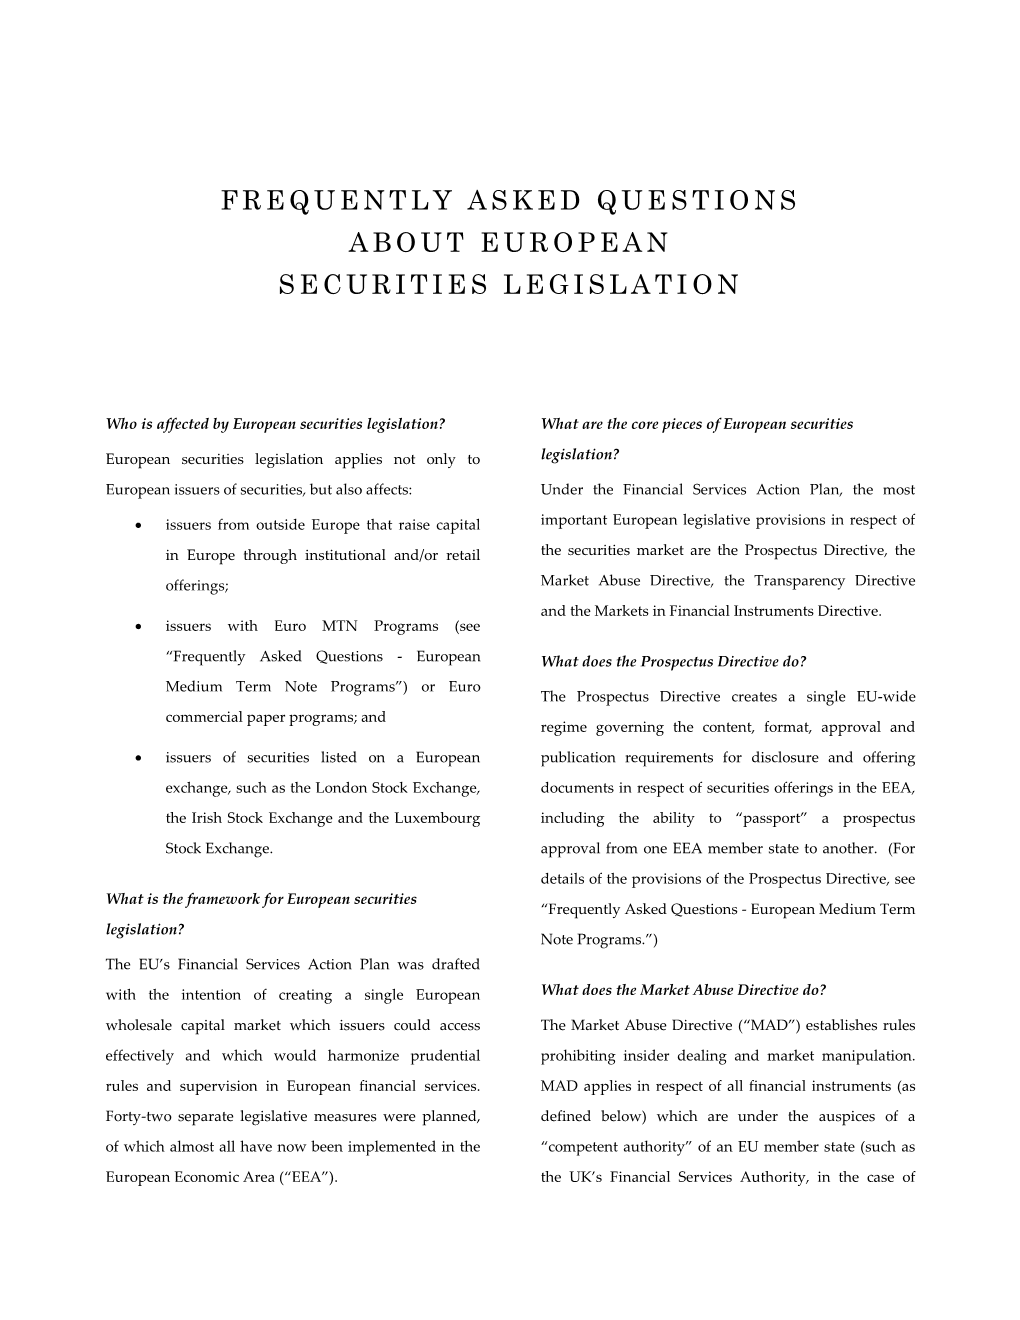 Frequently Asked Questions About European Securities Legislation